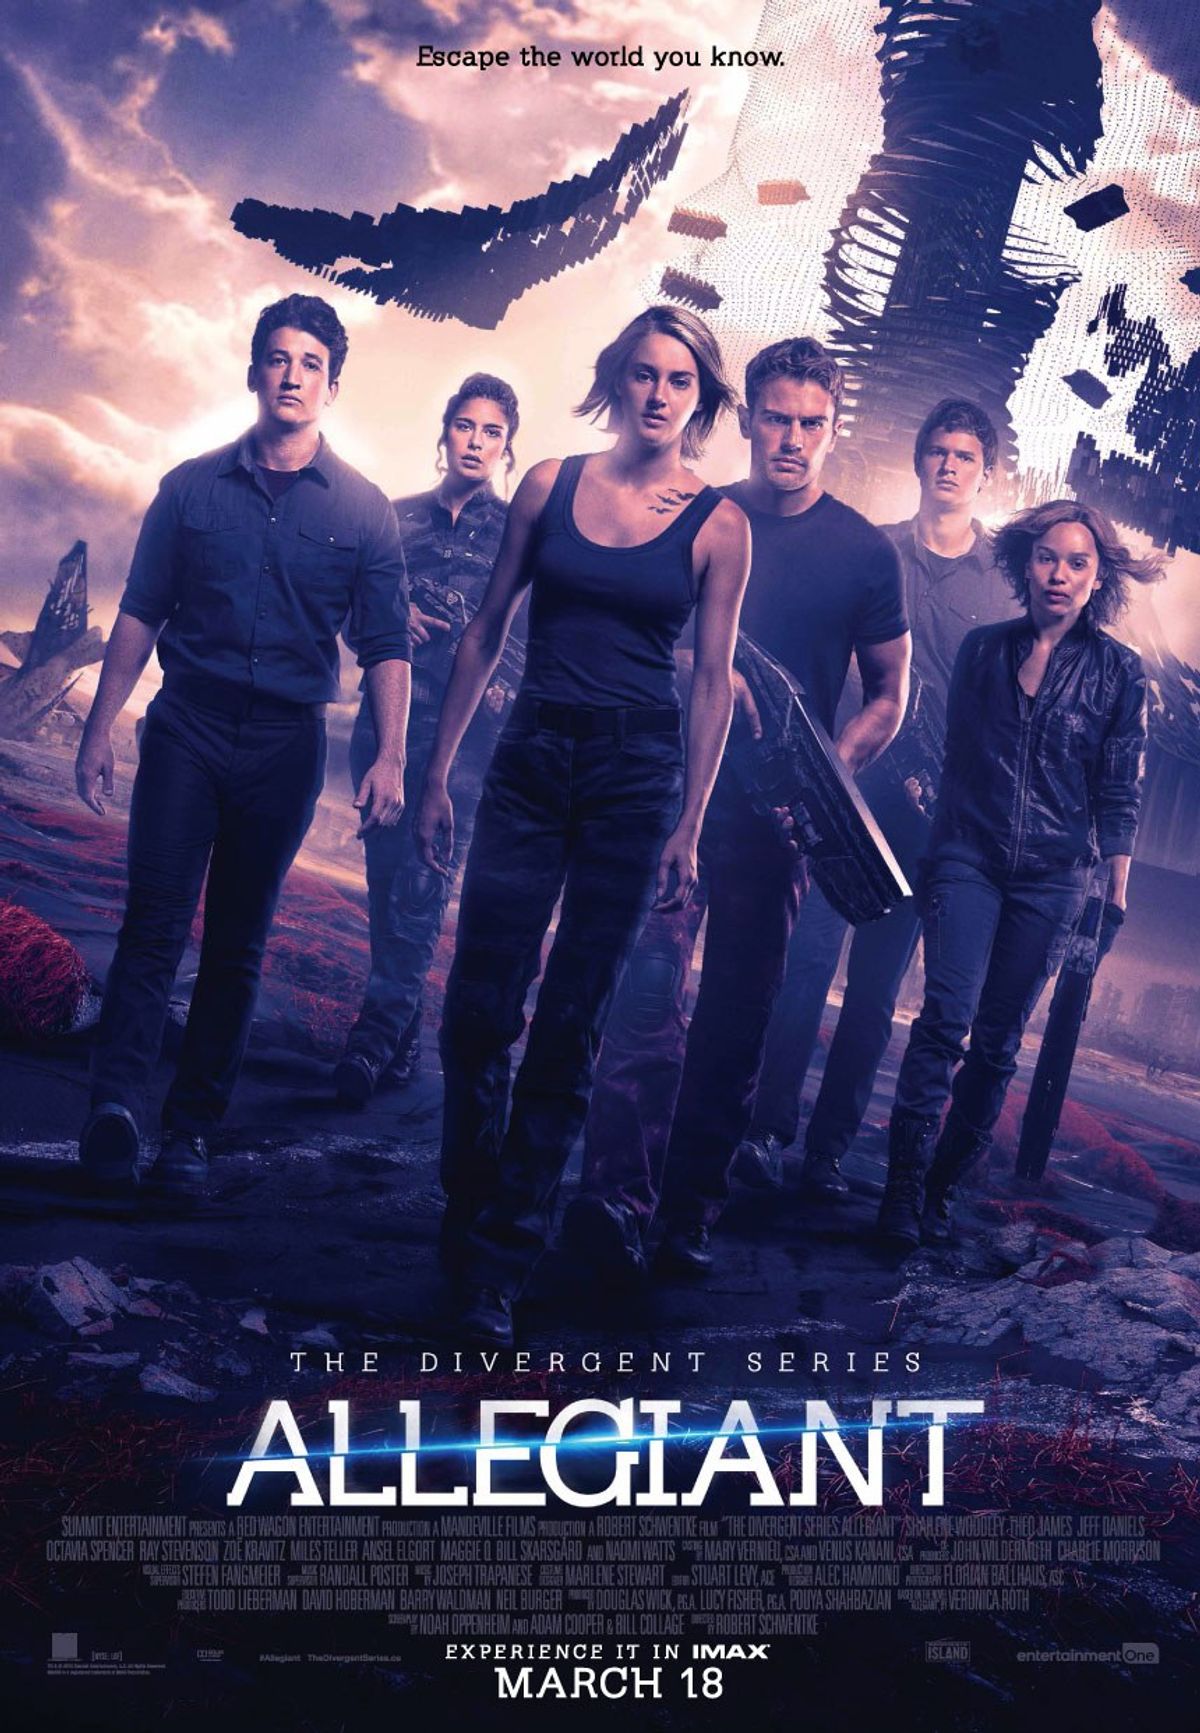 Allegiant: A Huge Disappointment